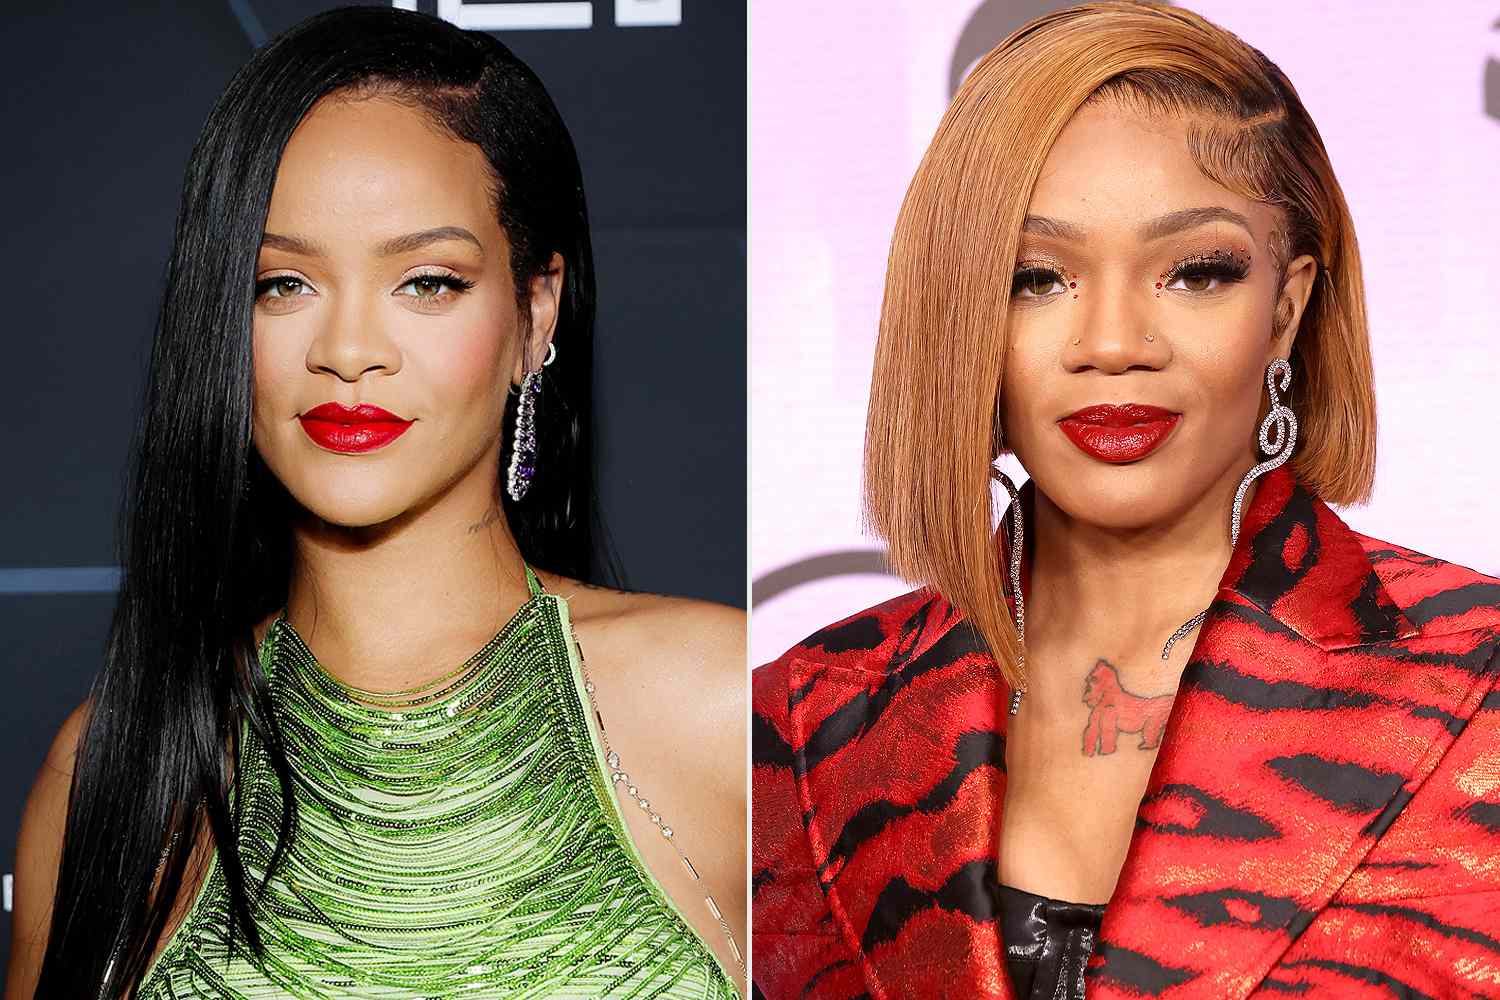 GloRilla Shares DM from Rihanna with 'Wild Hypocritical' Question About When Her Upcoming Album Drops